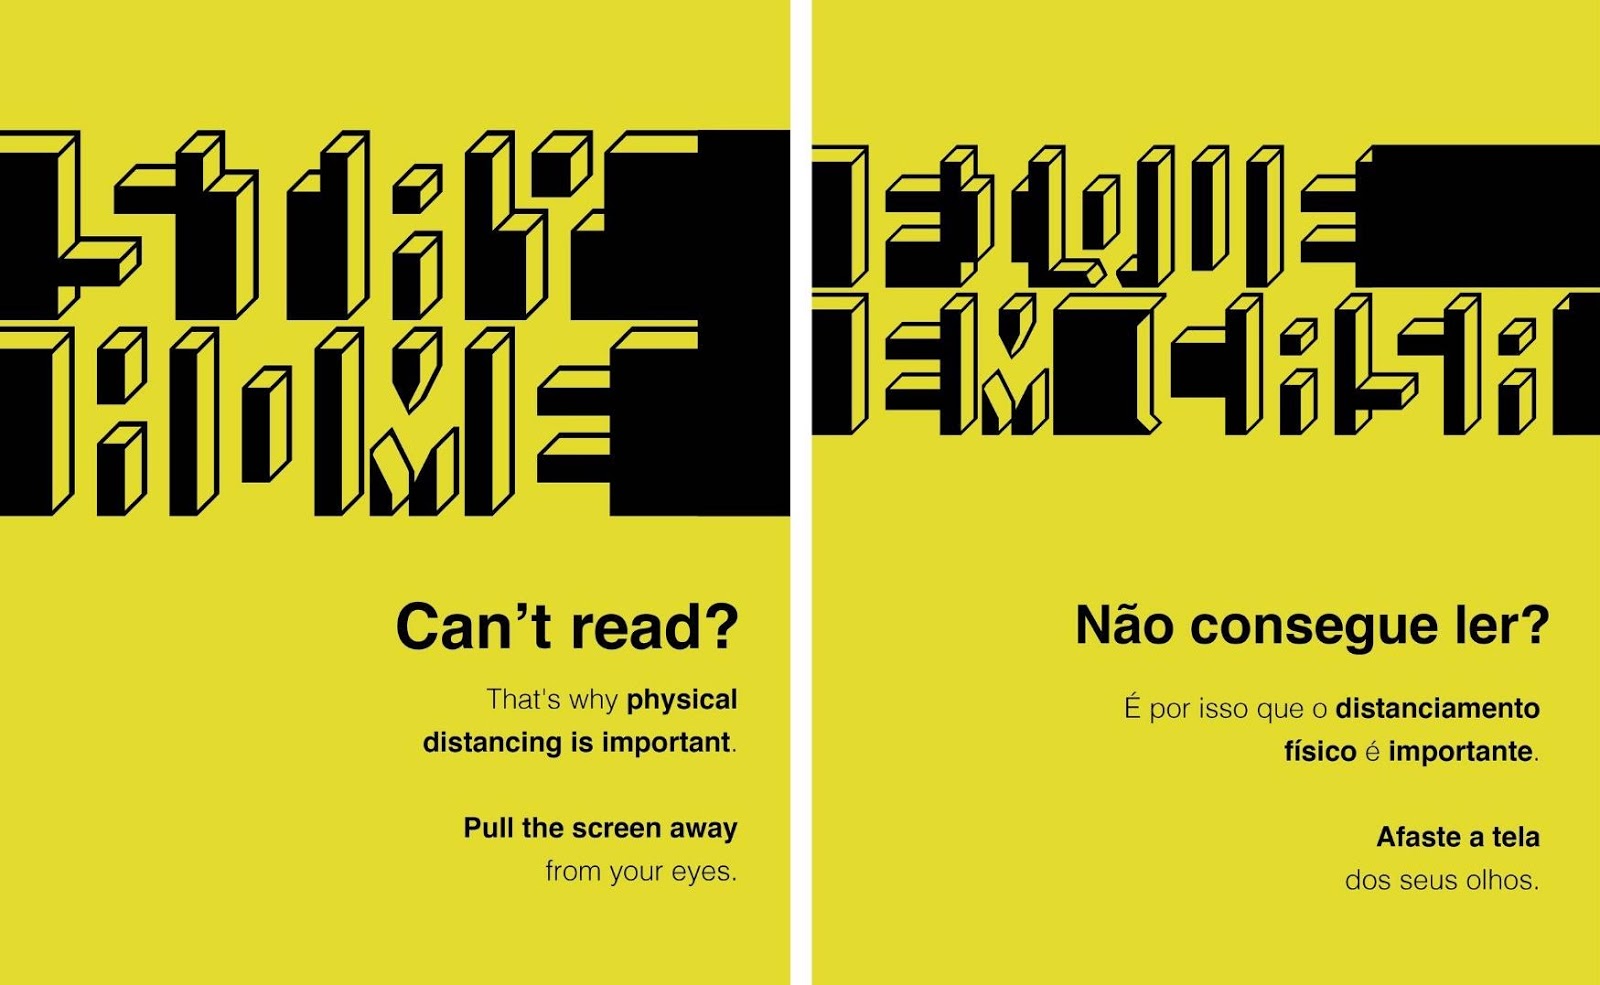 João Pedro Novochadlo's submission to the United Nations Covid-19 Global Call Out to Creatives illustrates the importance of social distancing with typography that is only legible when the reader moves away from the screen.